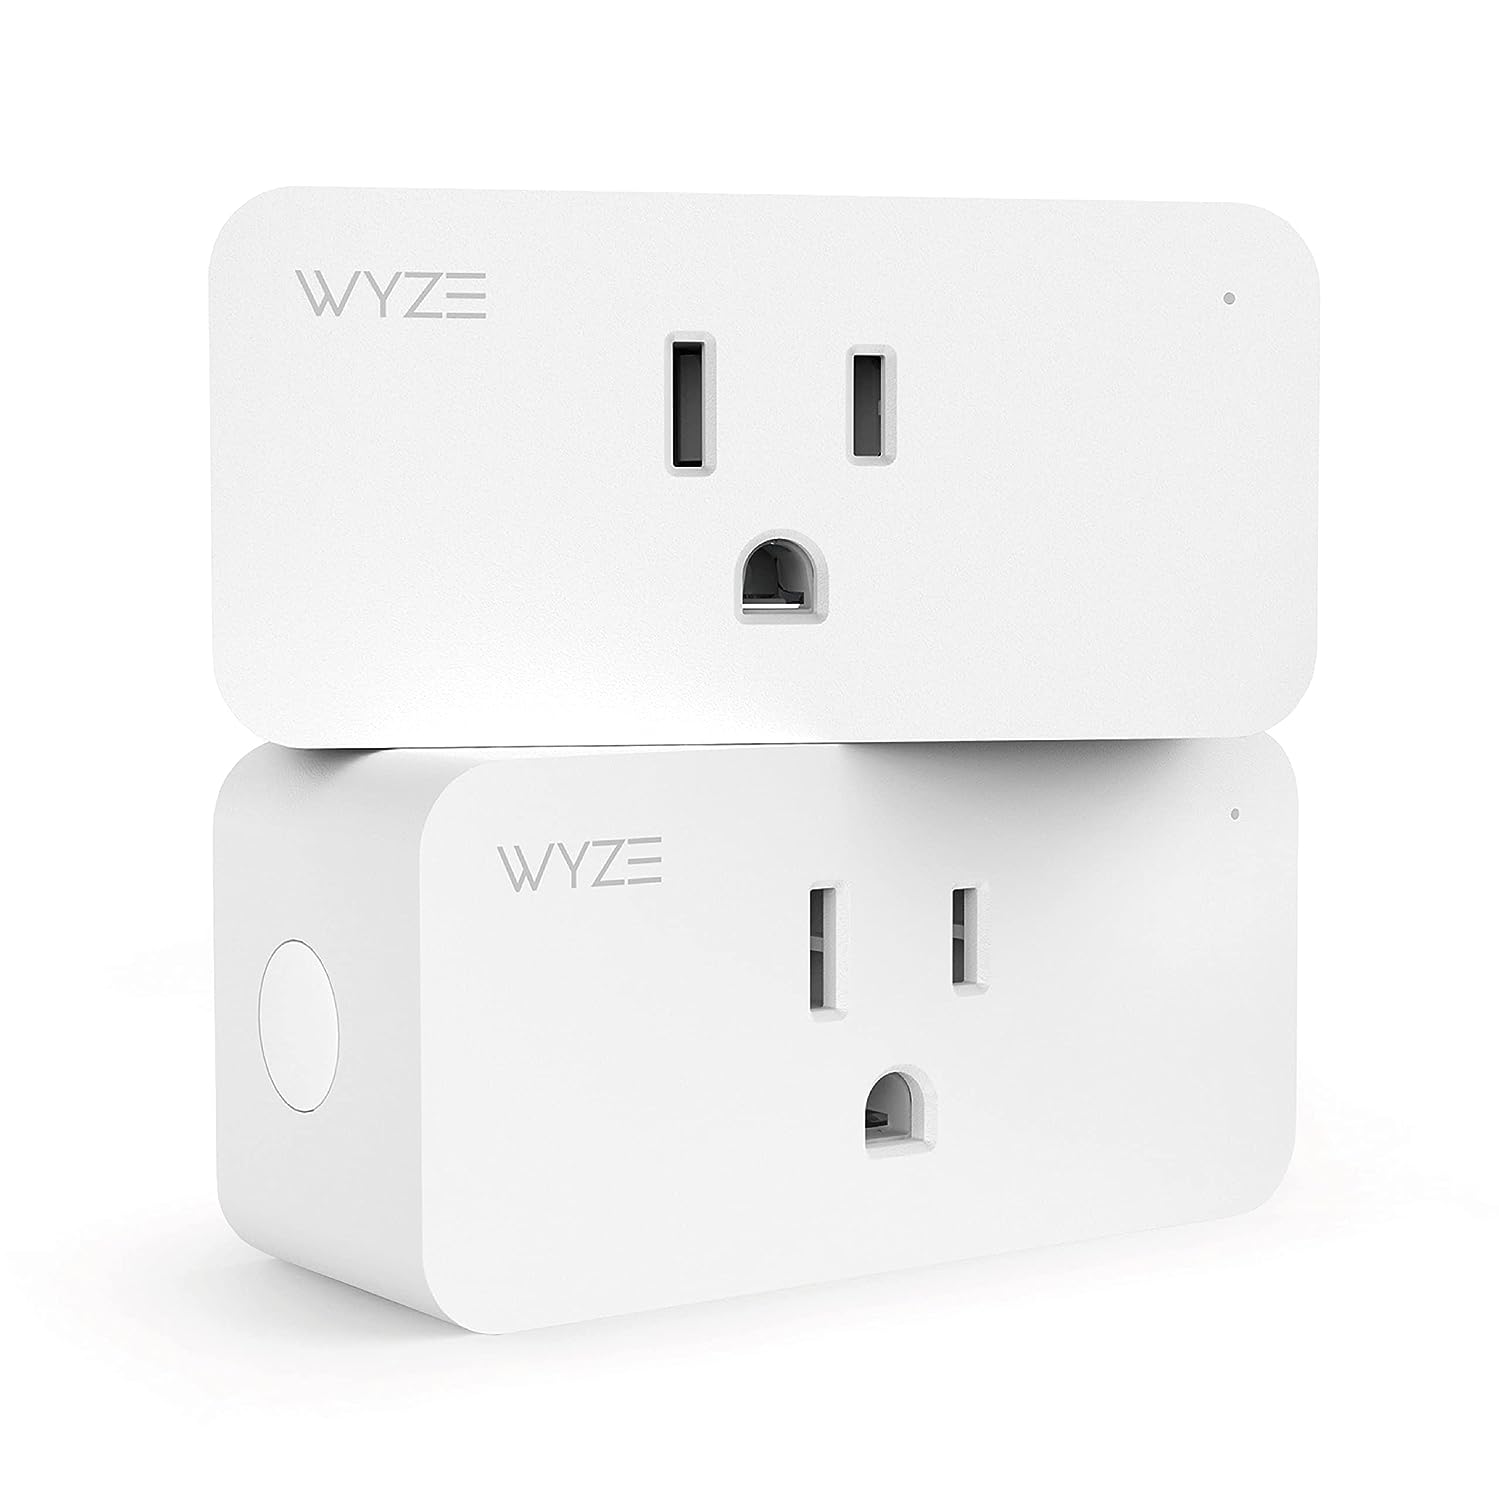 Through the Wyze app, you can schedule, automate, and set device timers of your smart plug